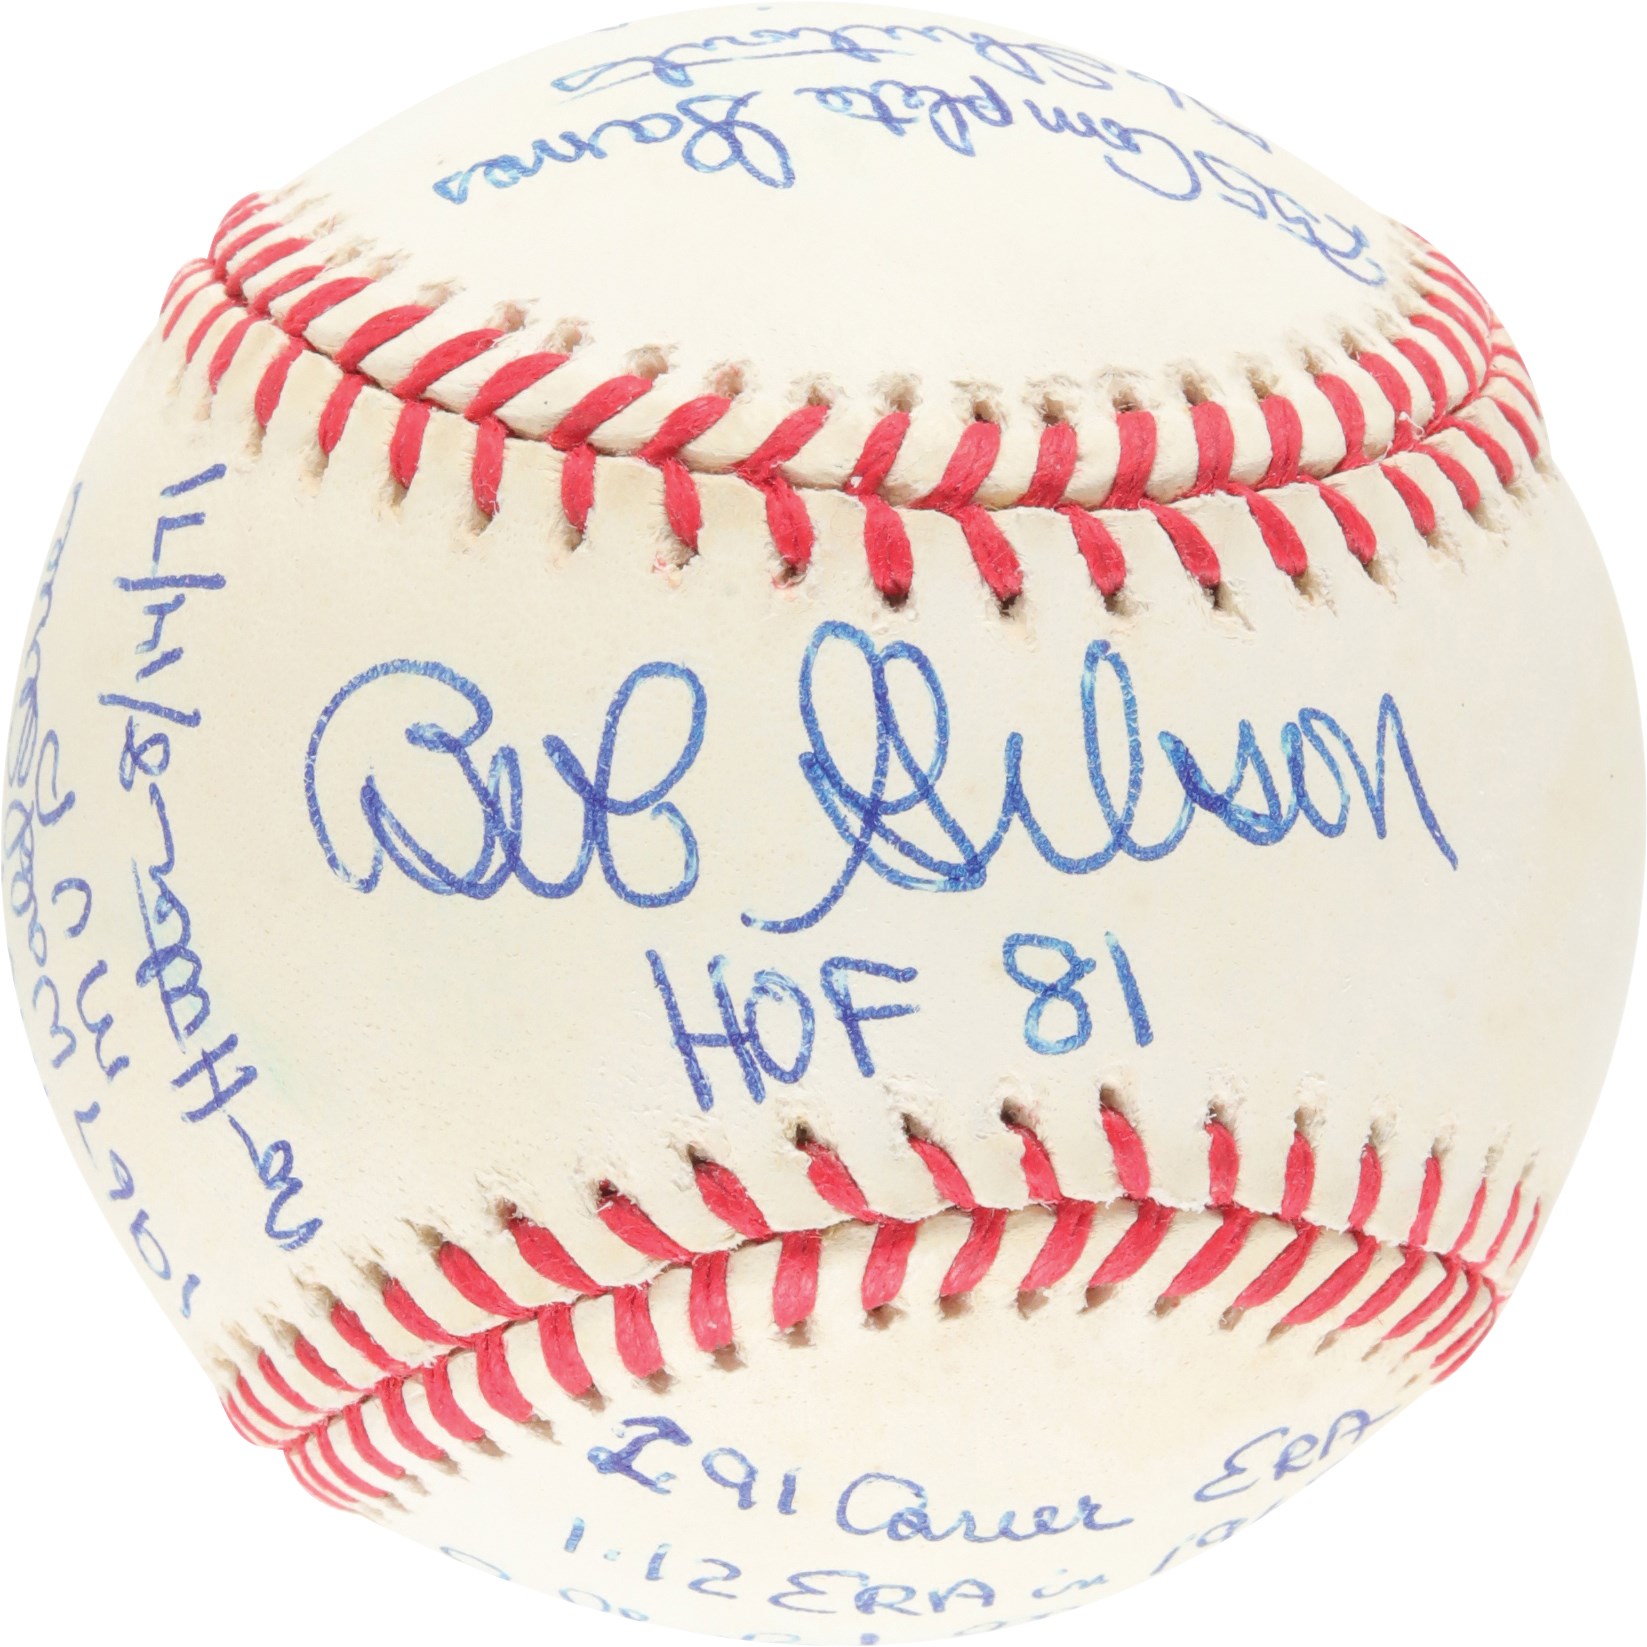 - Bob Gibson Signed and 16x Inscribed Stat Baseball